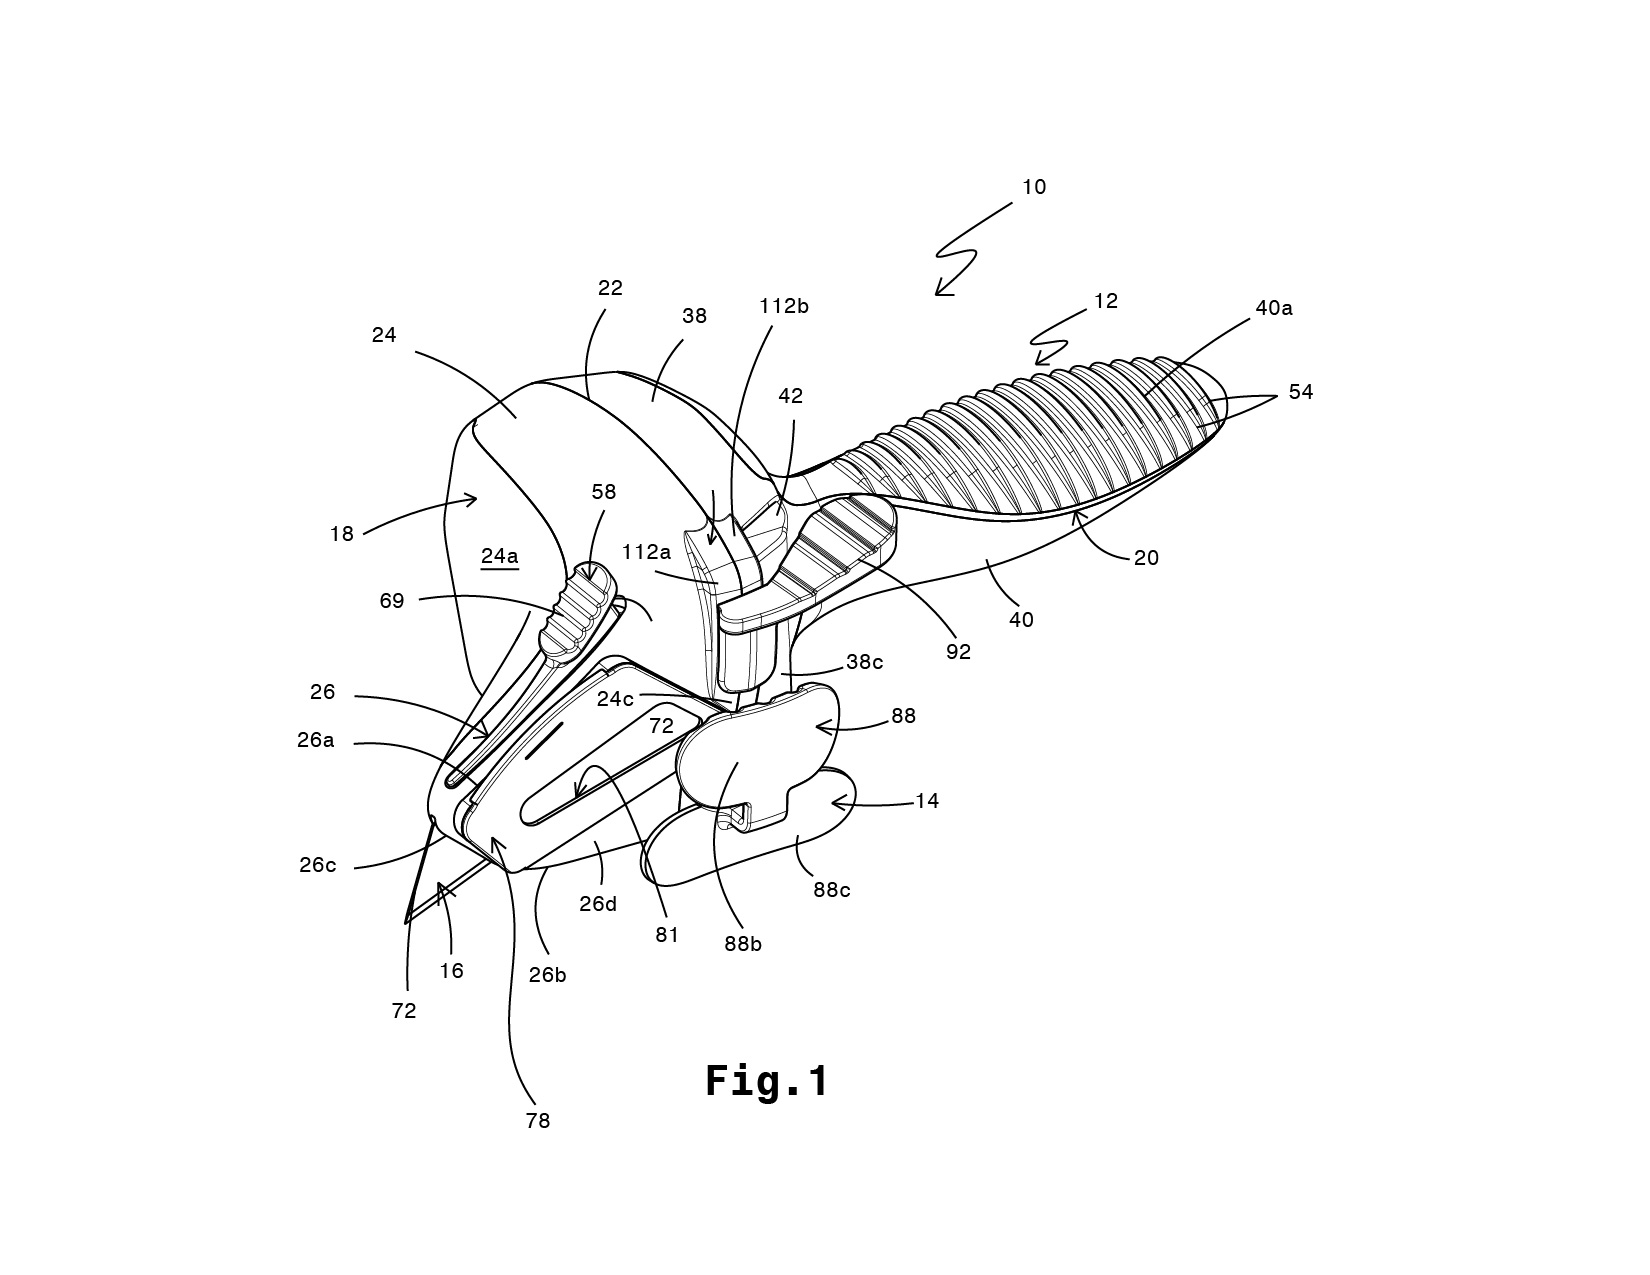 Patent Drawing Services Patent Drawing Help Spark Innovations Examples of design patent drawings